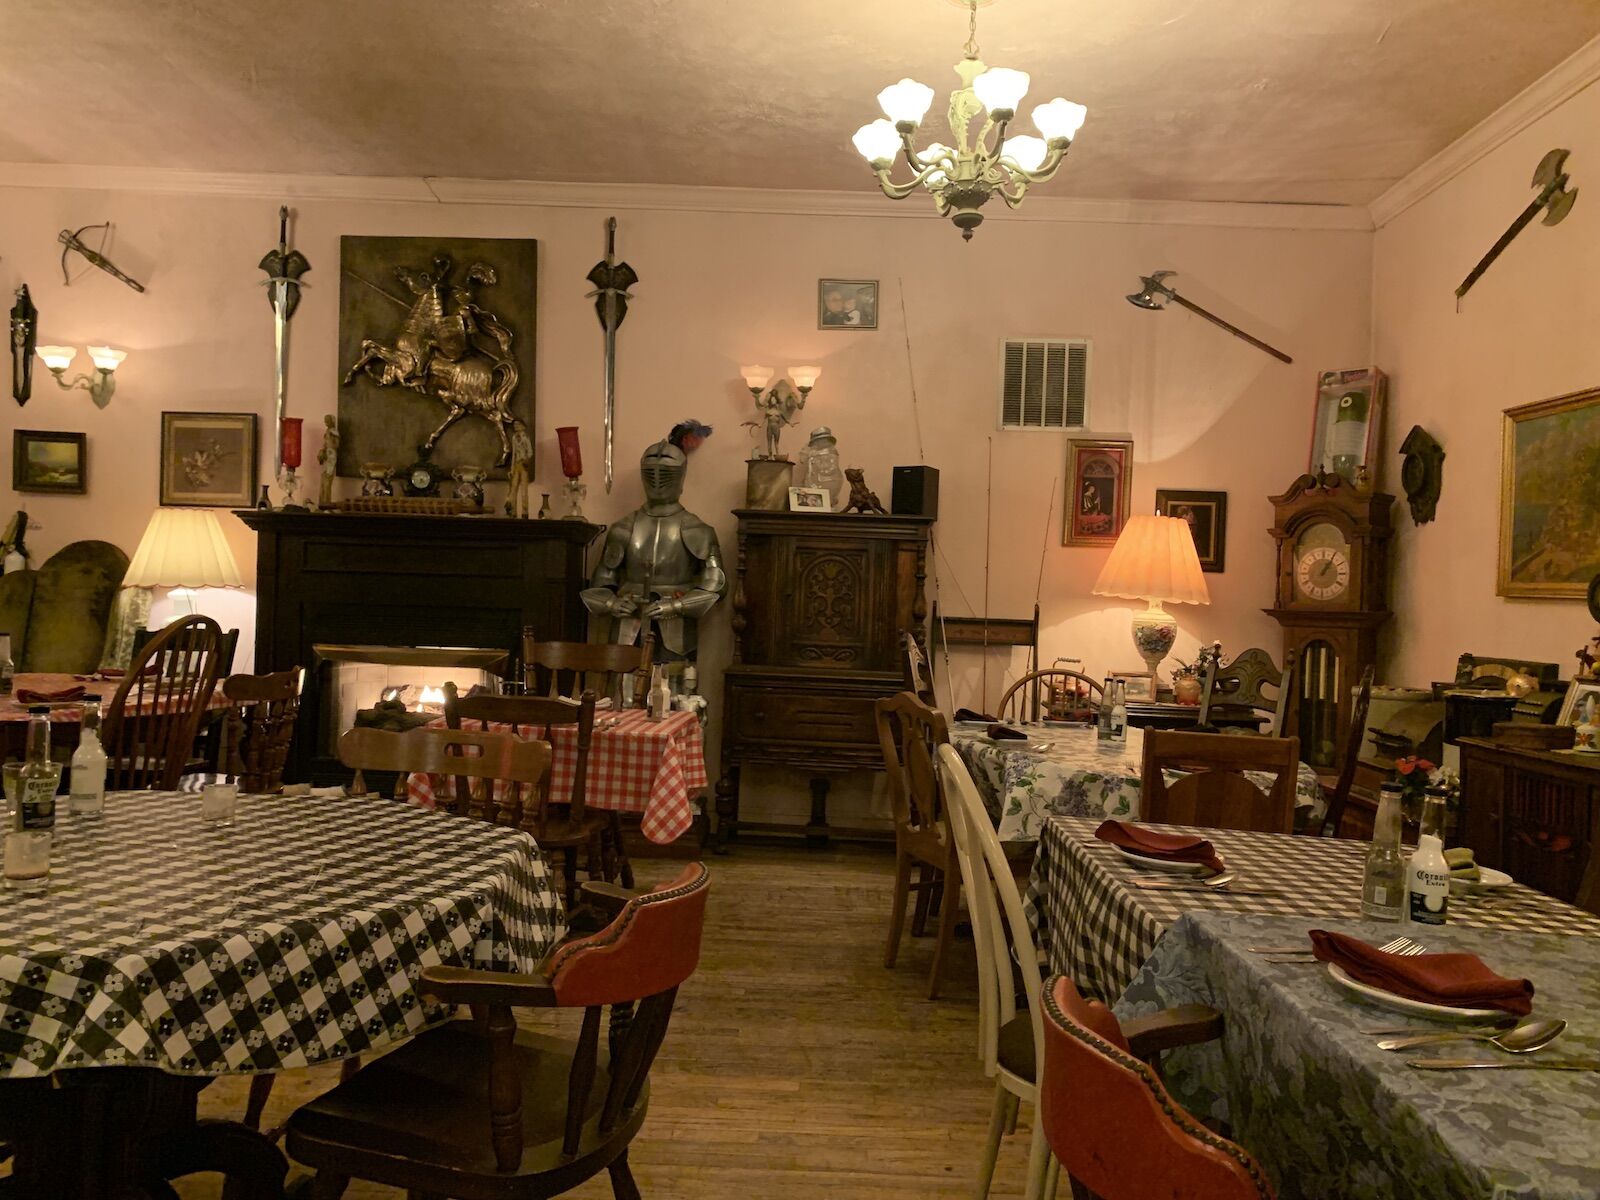 Interior of one of the best Italian restaurants in Pittsburgh, Zarra's, featuring a suit of armor, axes on the walls, and checked tablecothes